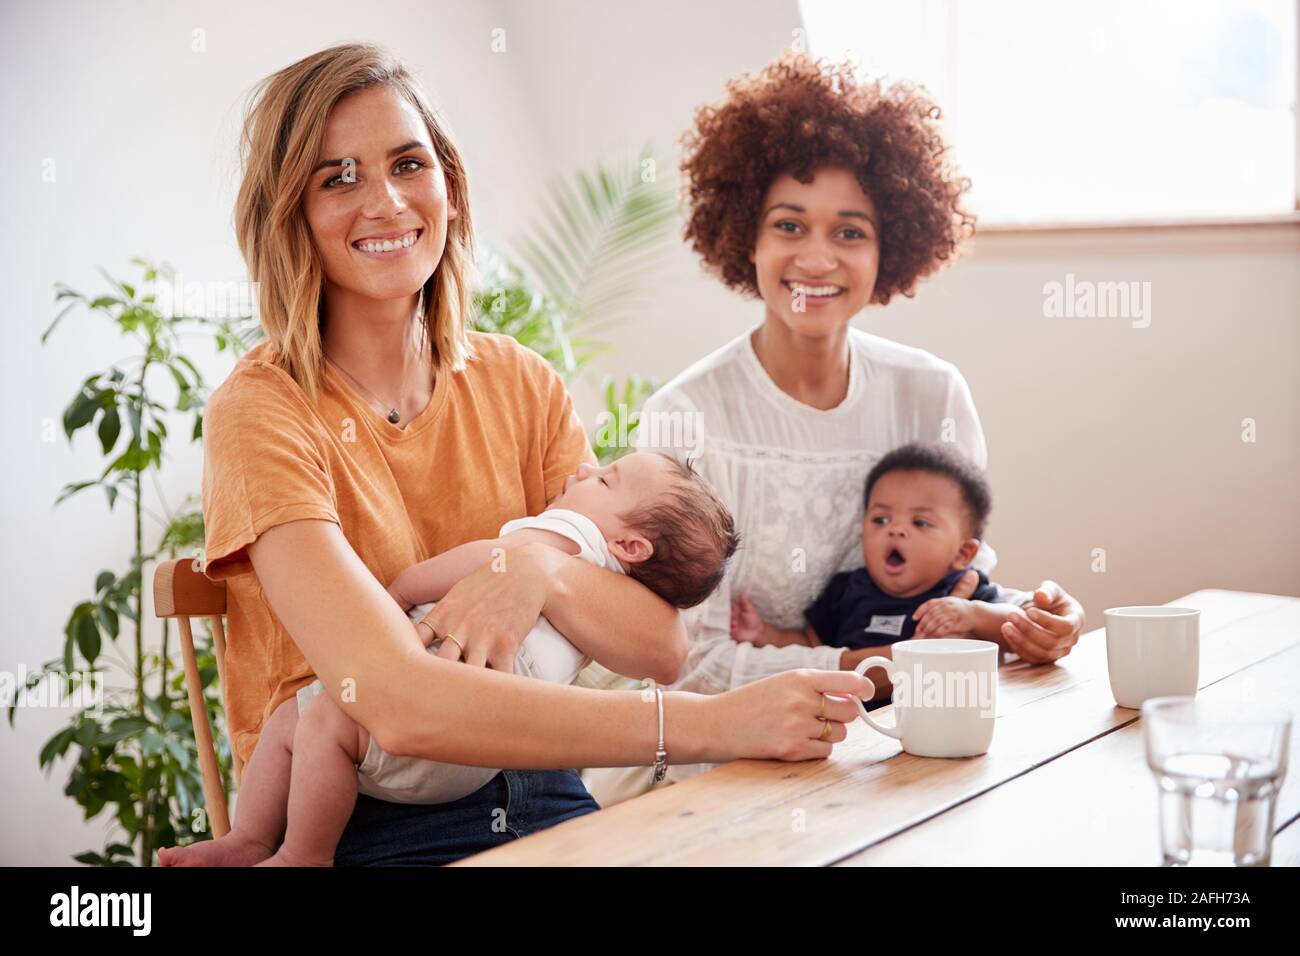 Portrait Of Two Mothers With Babies Meeting Around Table On Play Date At Home Stock Photo